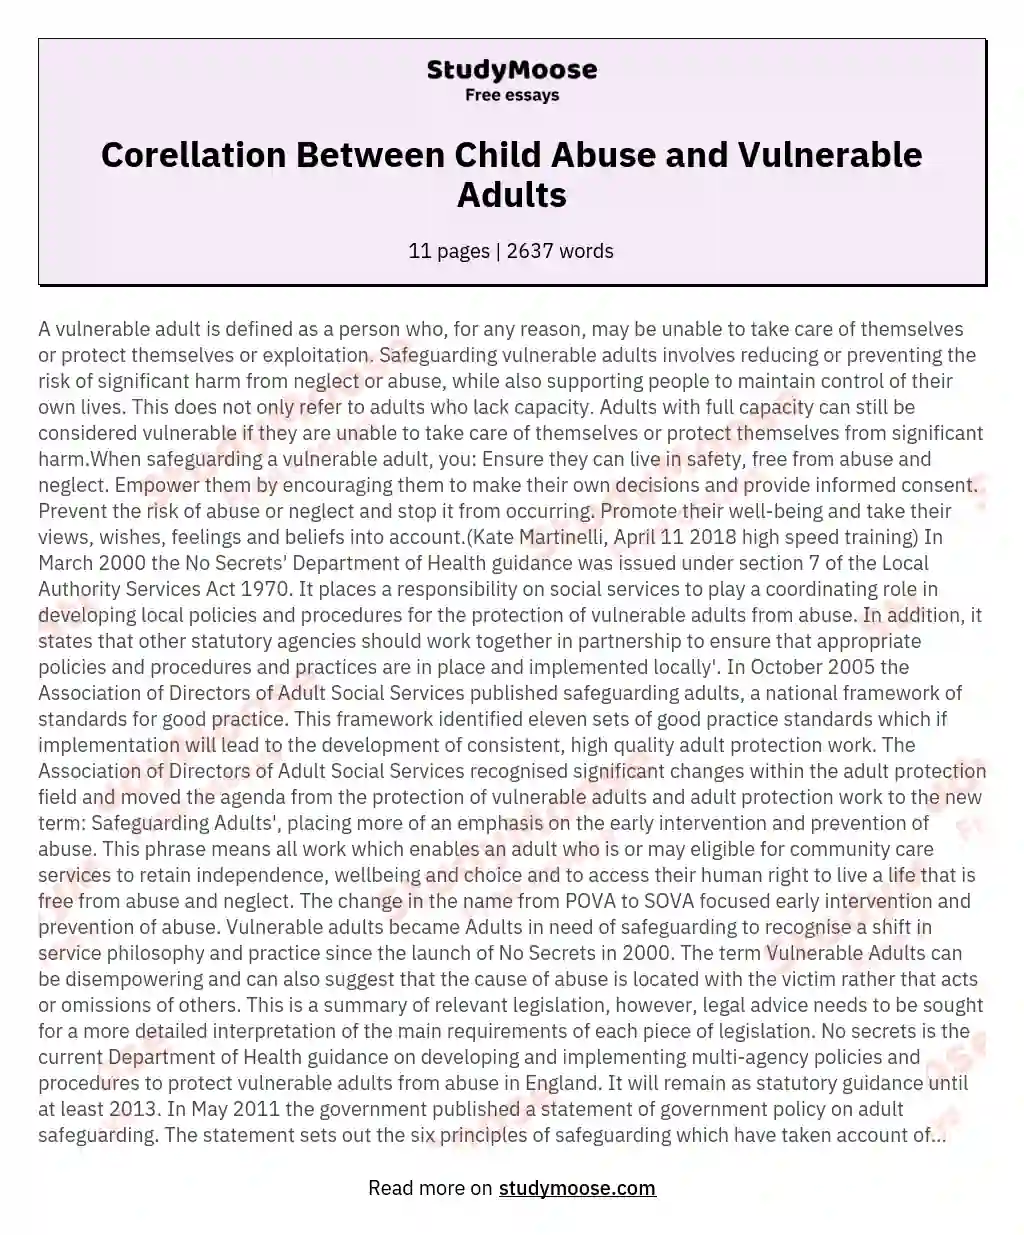 Corellation Between Child Abuse and Vulnerable Adults